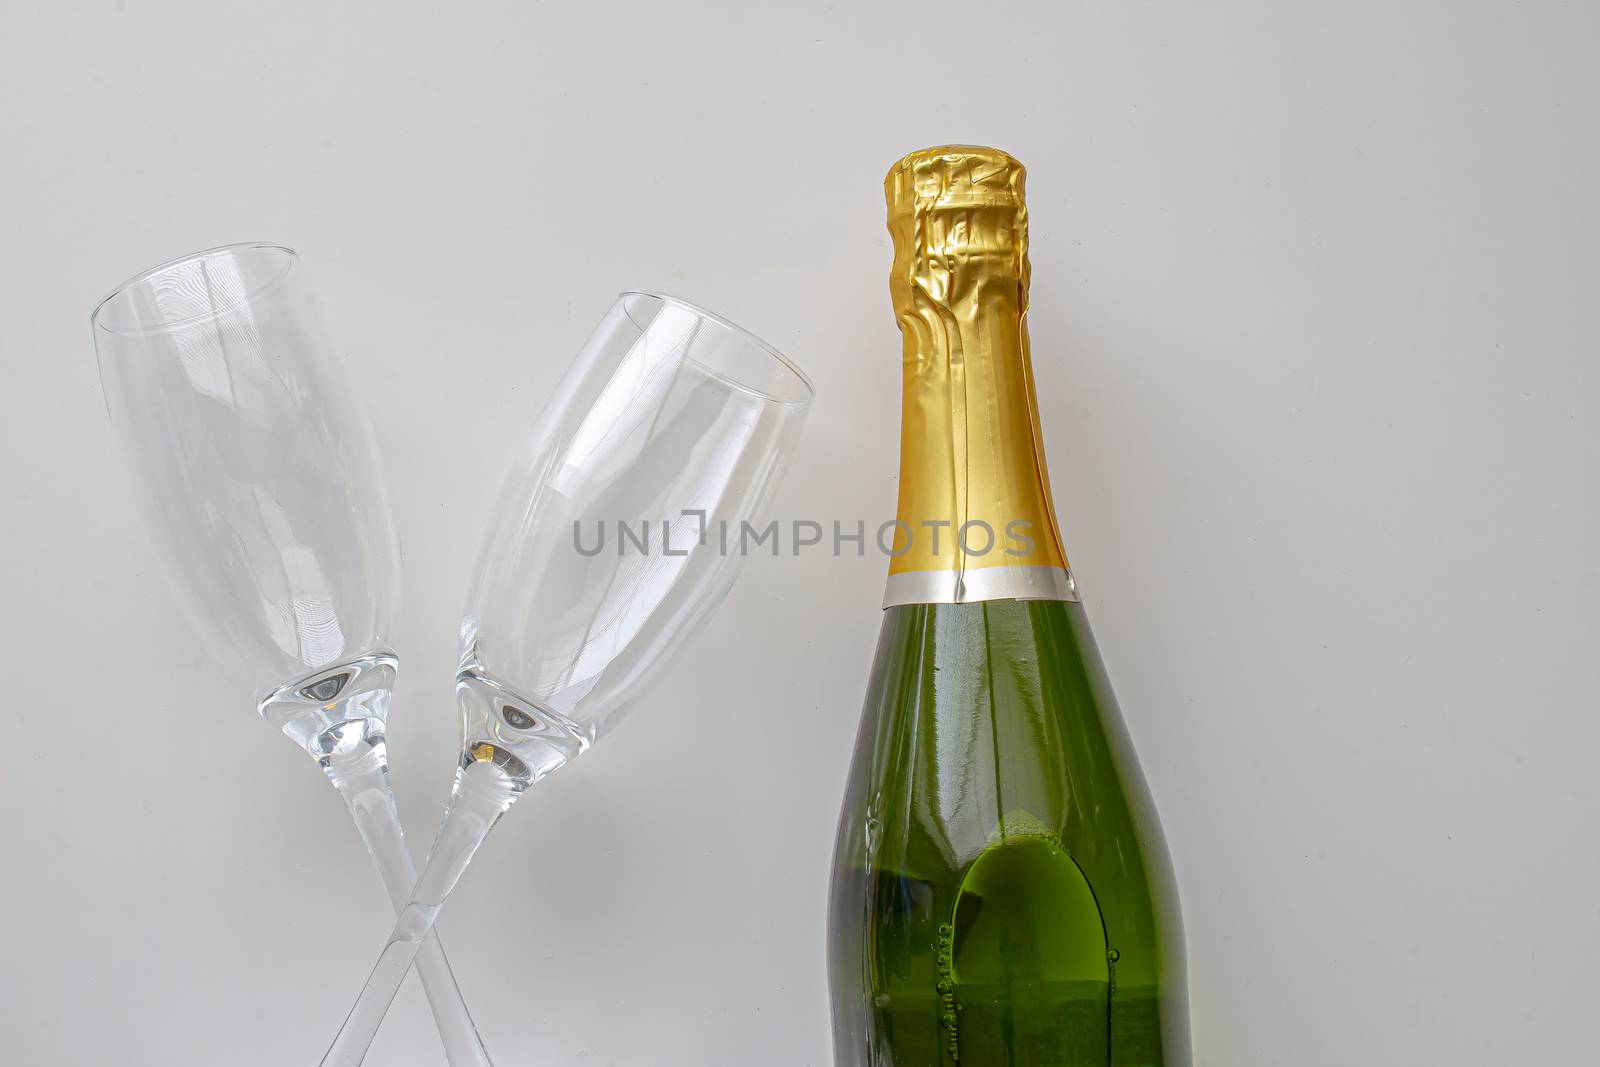 Unopened champagne bottle with cups on a white background